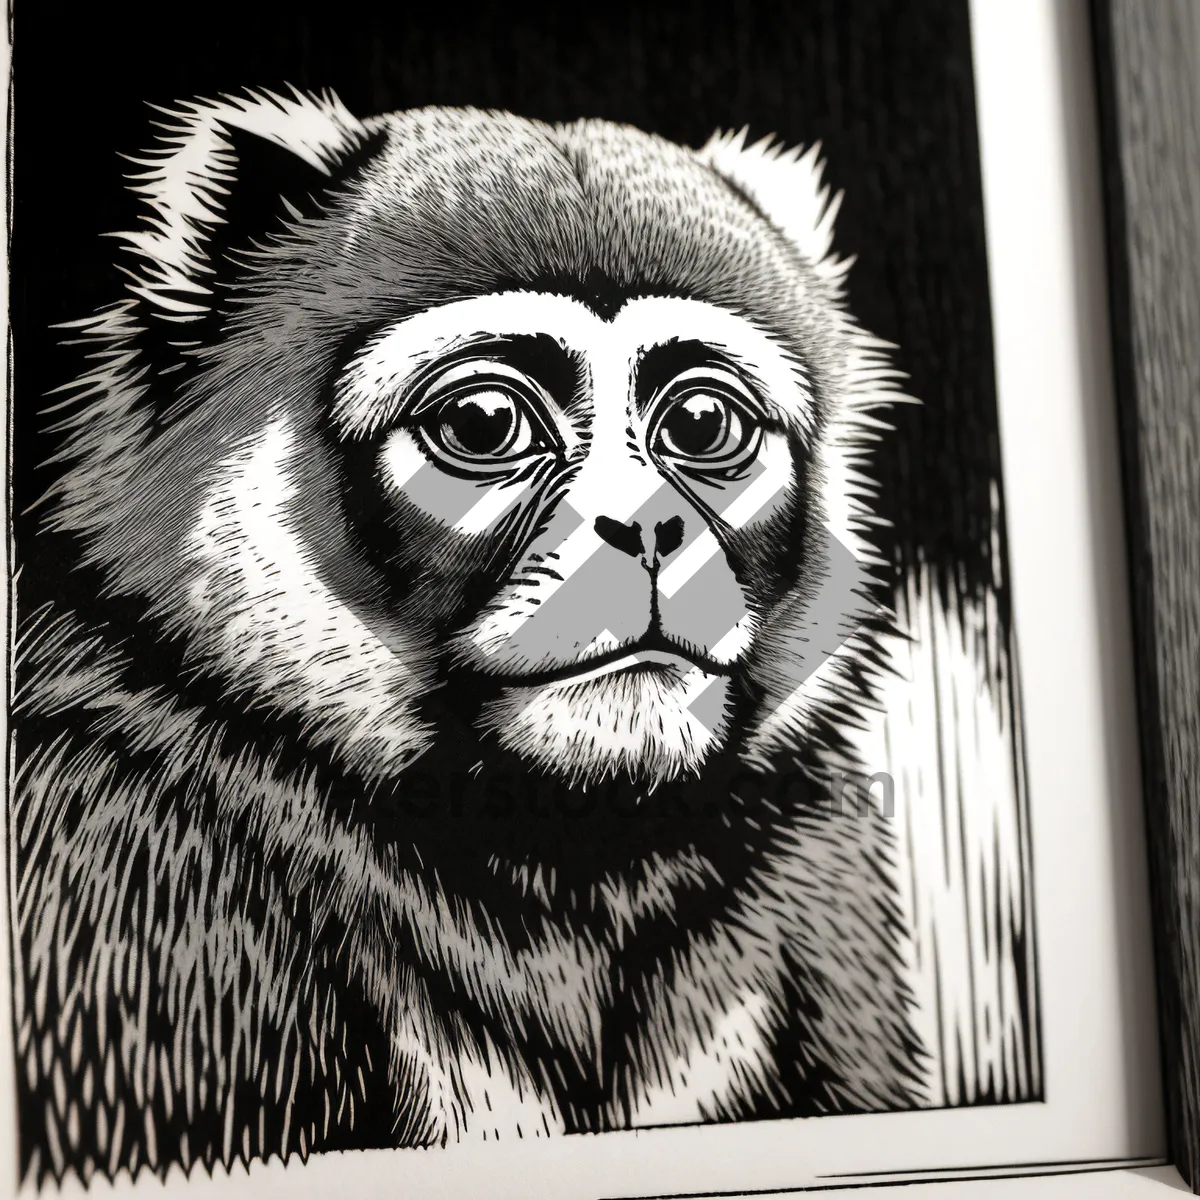 Picture of Gibbon Primate Portrait: Wild Monkey with Piercing Eyes